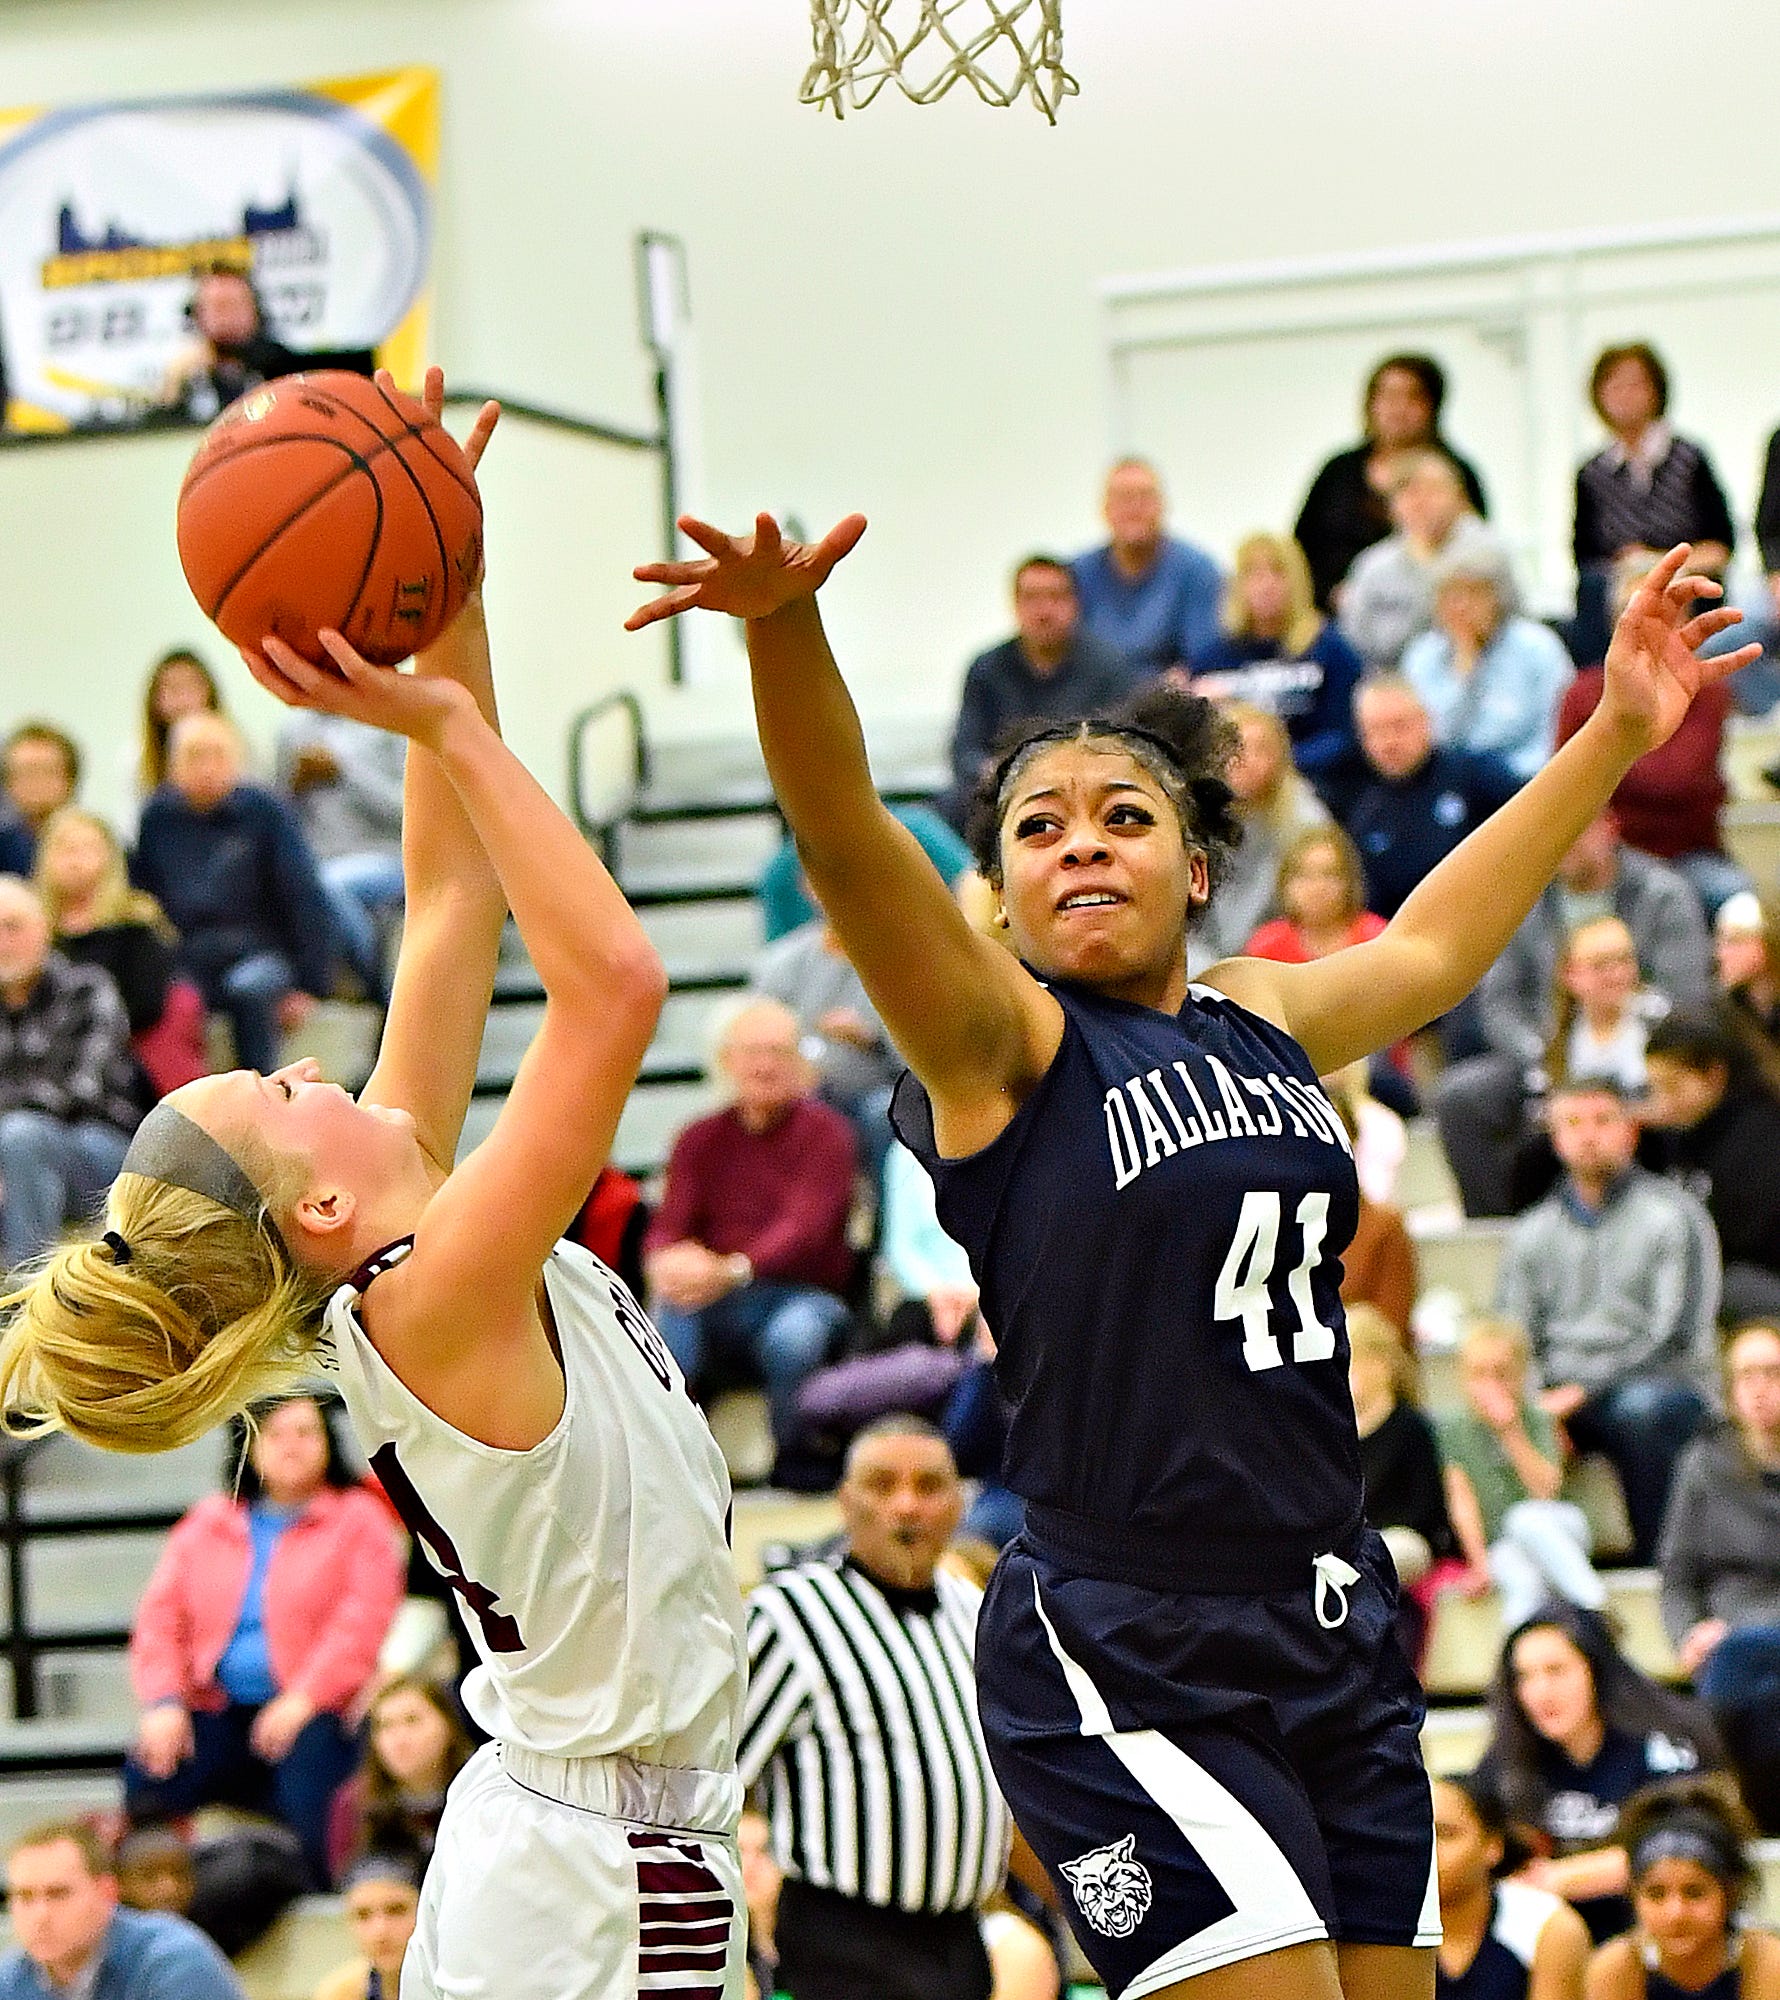 Gettysburg's Anne Bair, left, aims for the hoop while Dallastown's Bria Beverly defends during YAIAA girls' basketball championship action at Grumbacher Sport and Fitness Center at York College of Pennsylvania in Spring Garden Township, Friday, Feb. 14, 2020. Dawn J. Sagert photo